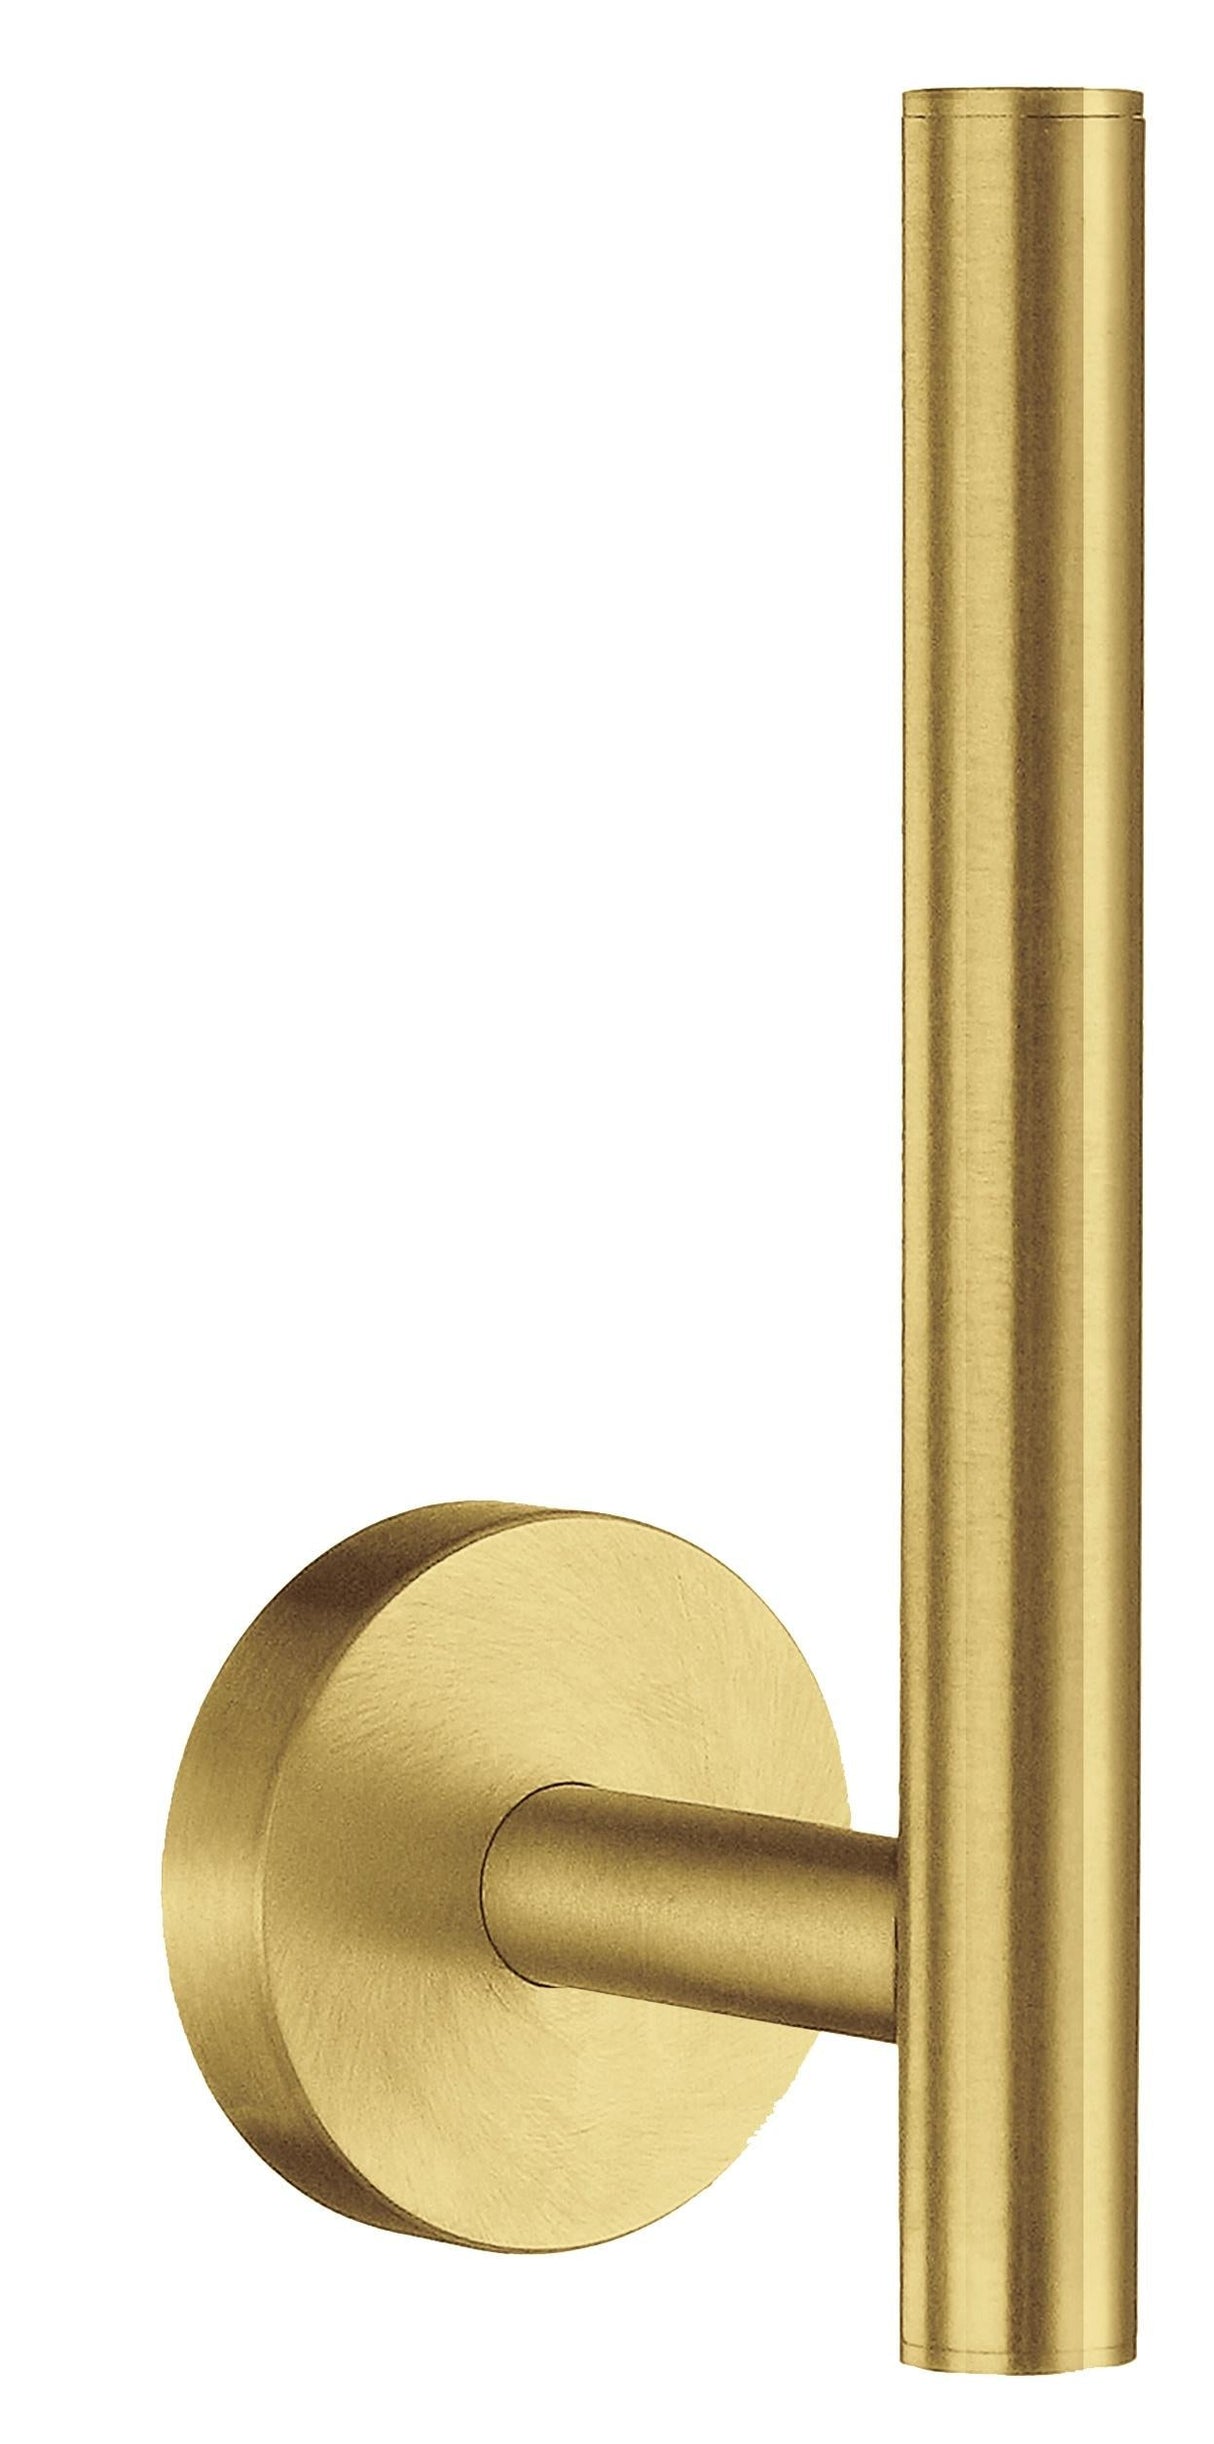 Smedbo Home Spare Toilet Roll Holder in Brushed Brass